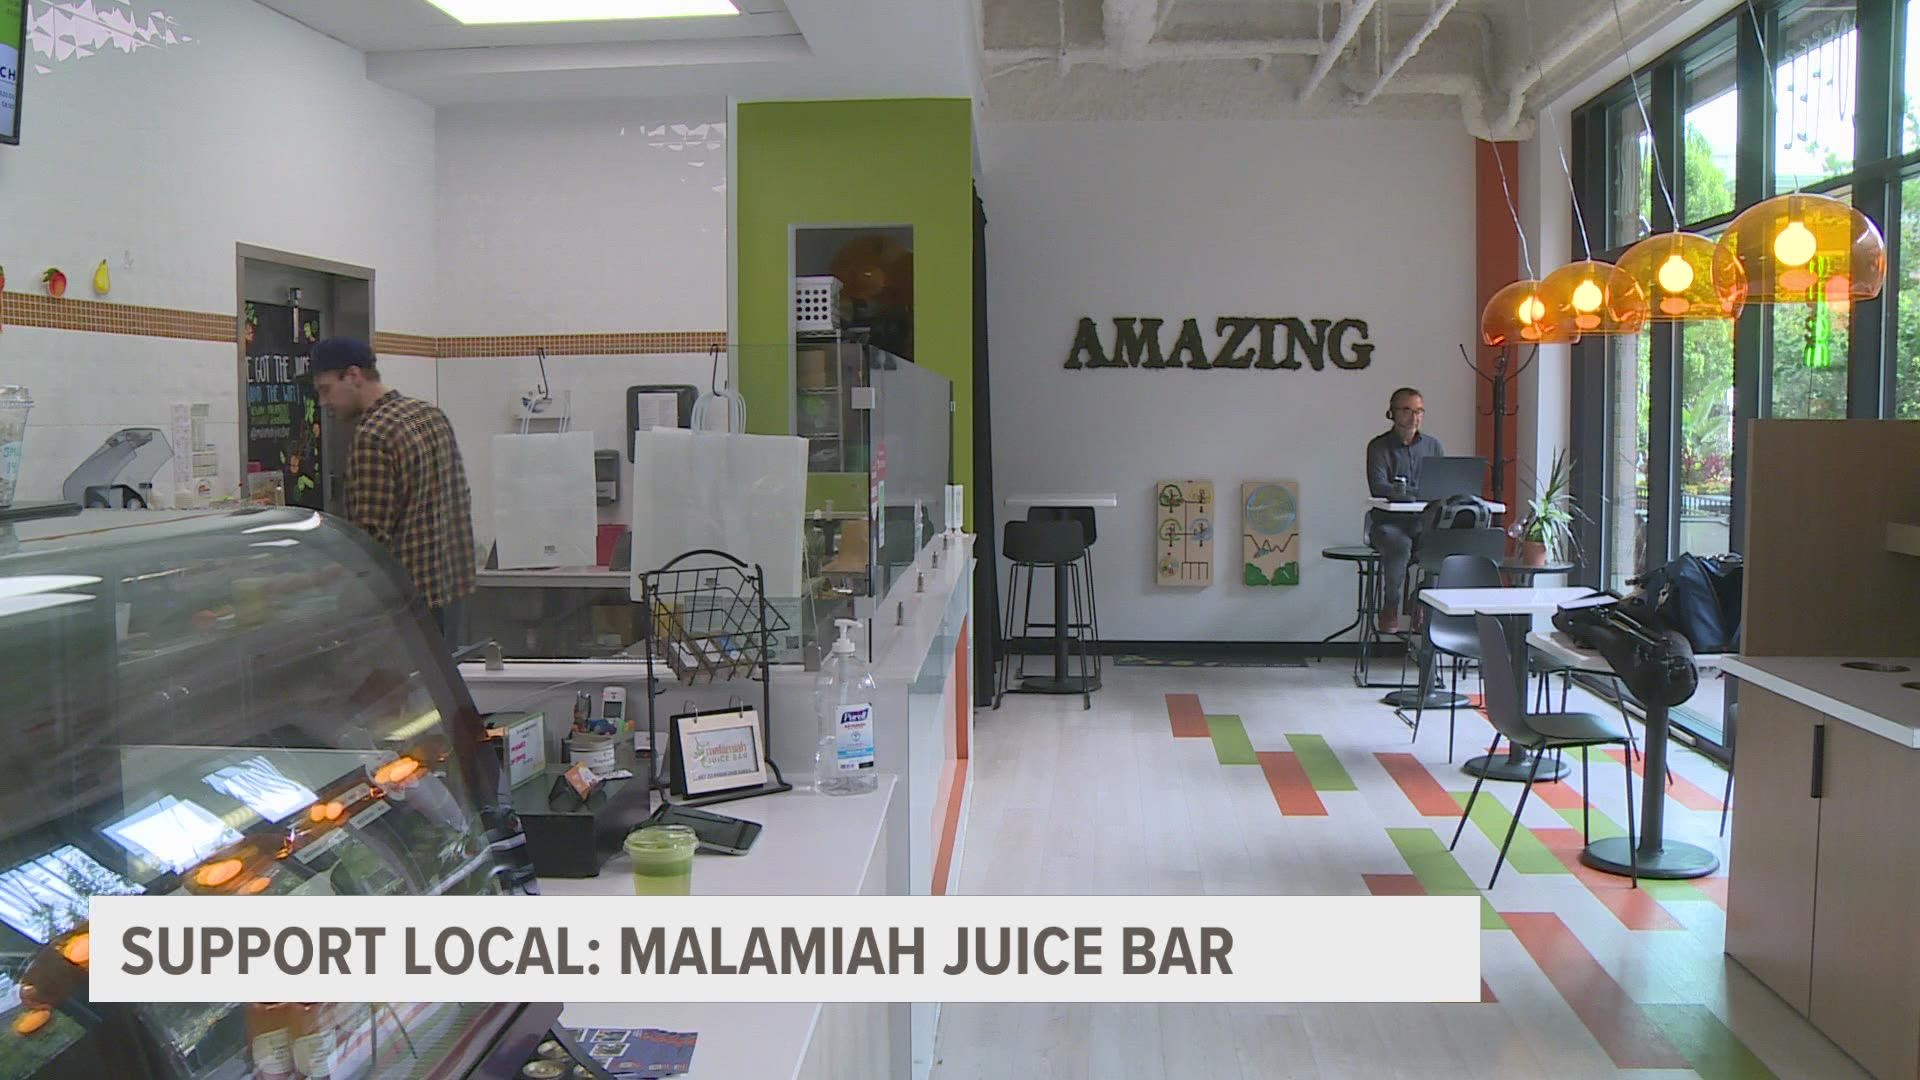 In July, the small business opened at second location at the YMCA of Greater Grand Rapids.